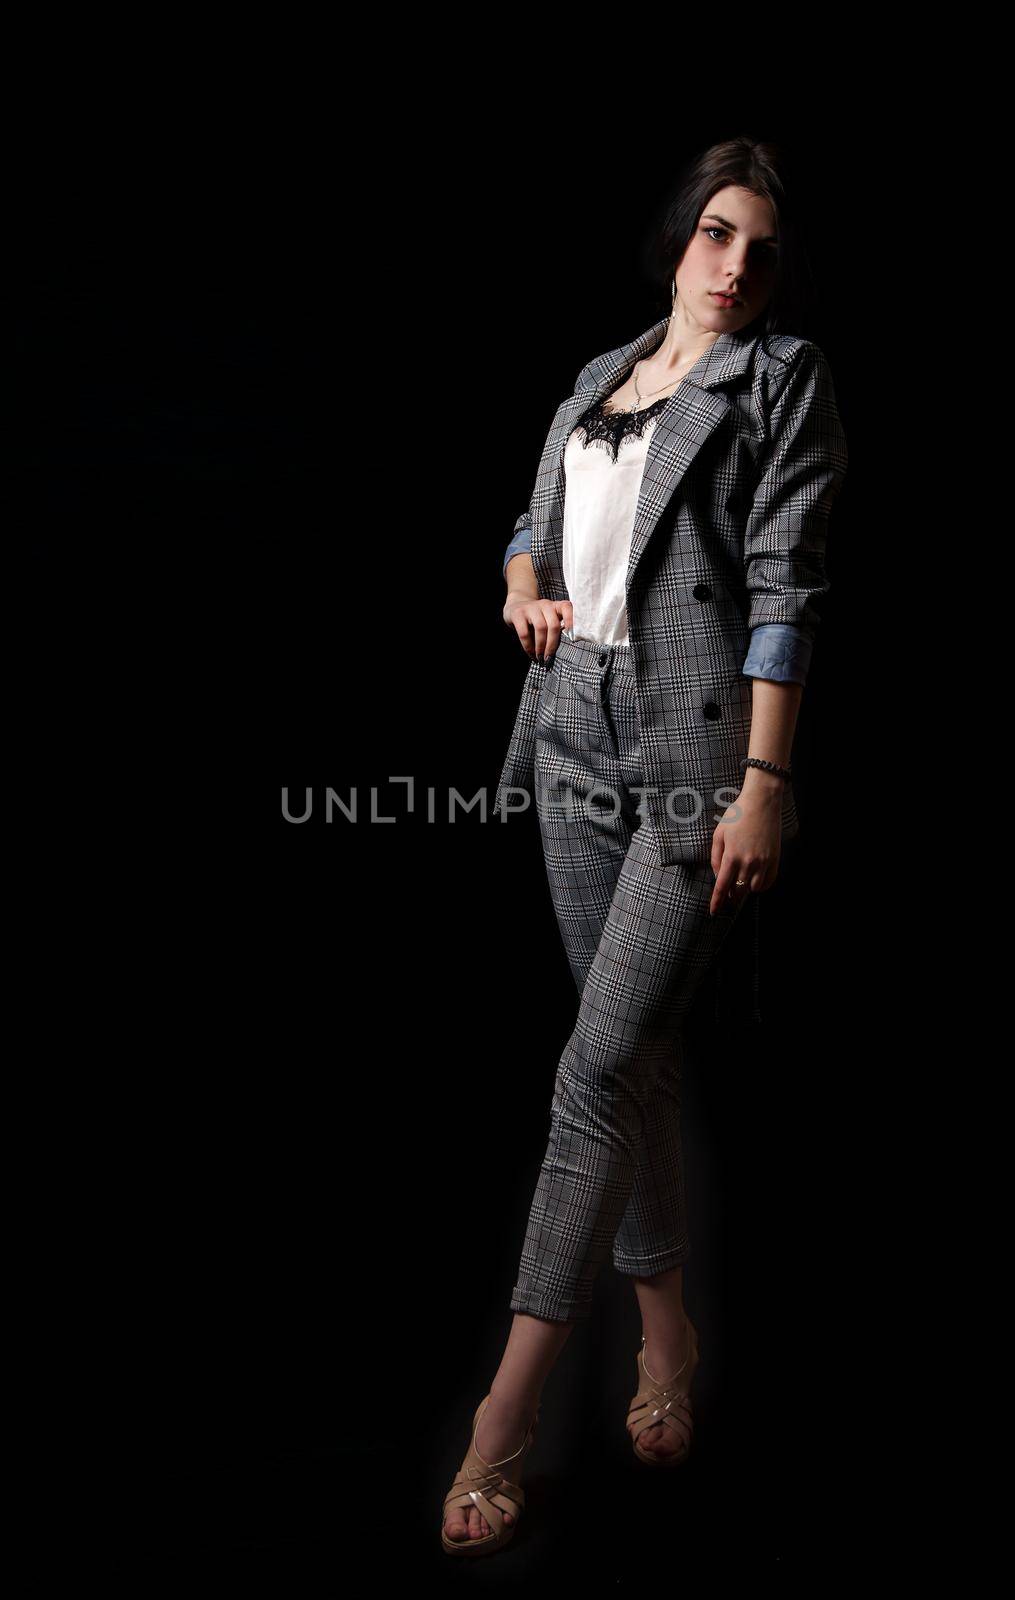 young beautiful girl in a business suit posing standing in the studio on black background